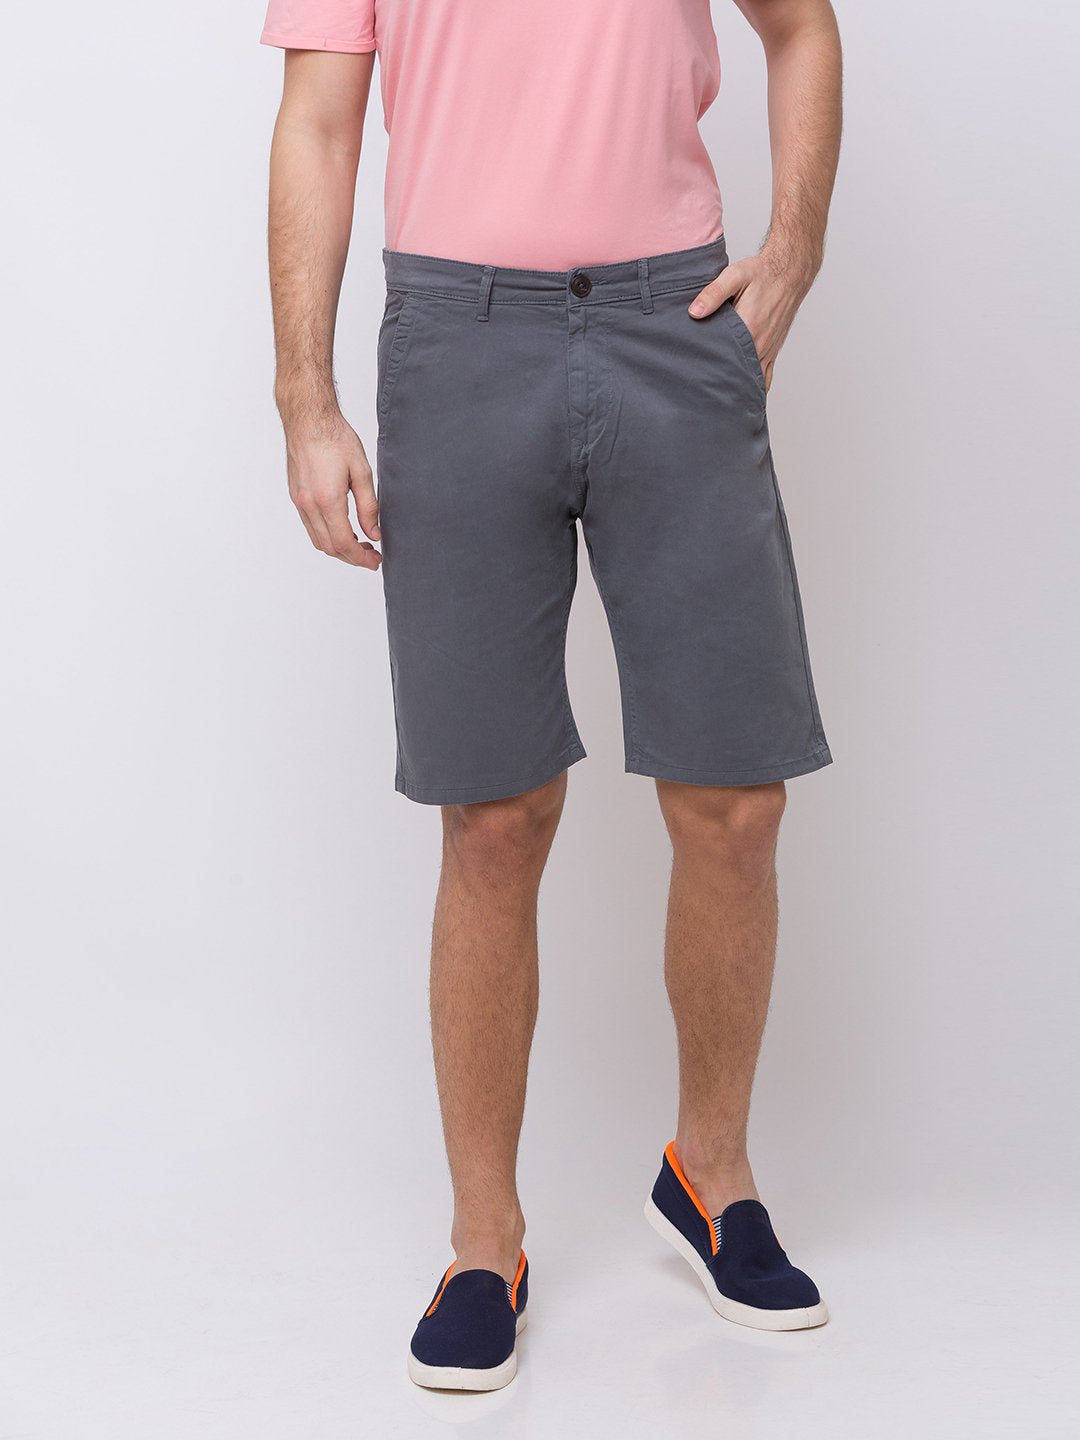 Status Quo |Charcoal Solid Woven Shorts - M, L, XL, XXL